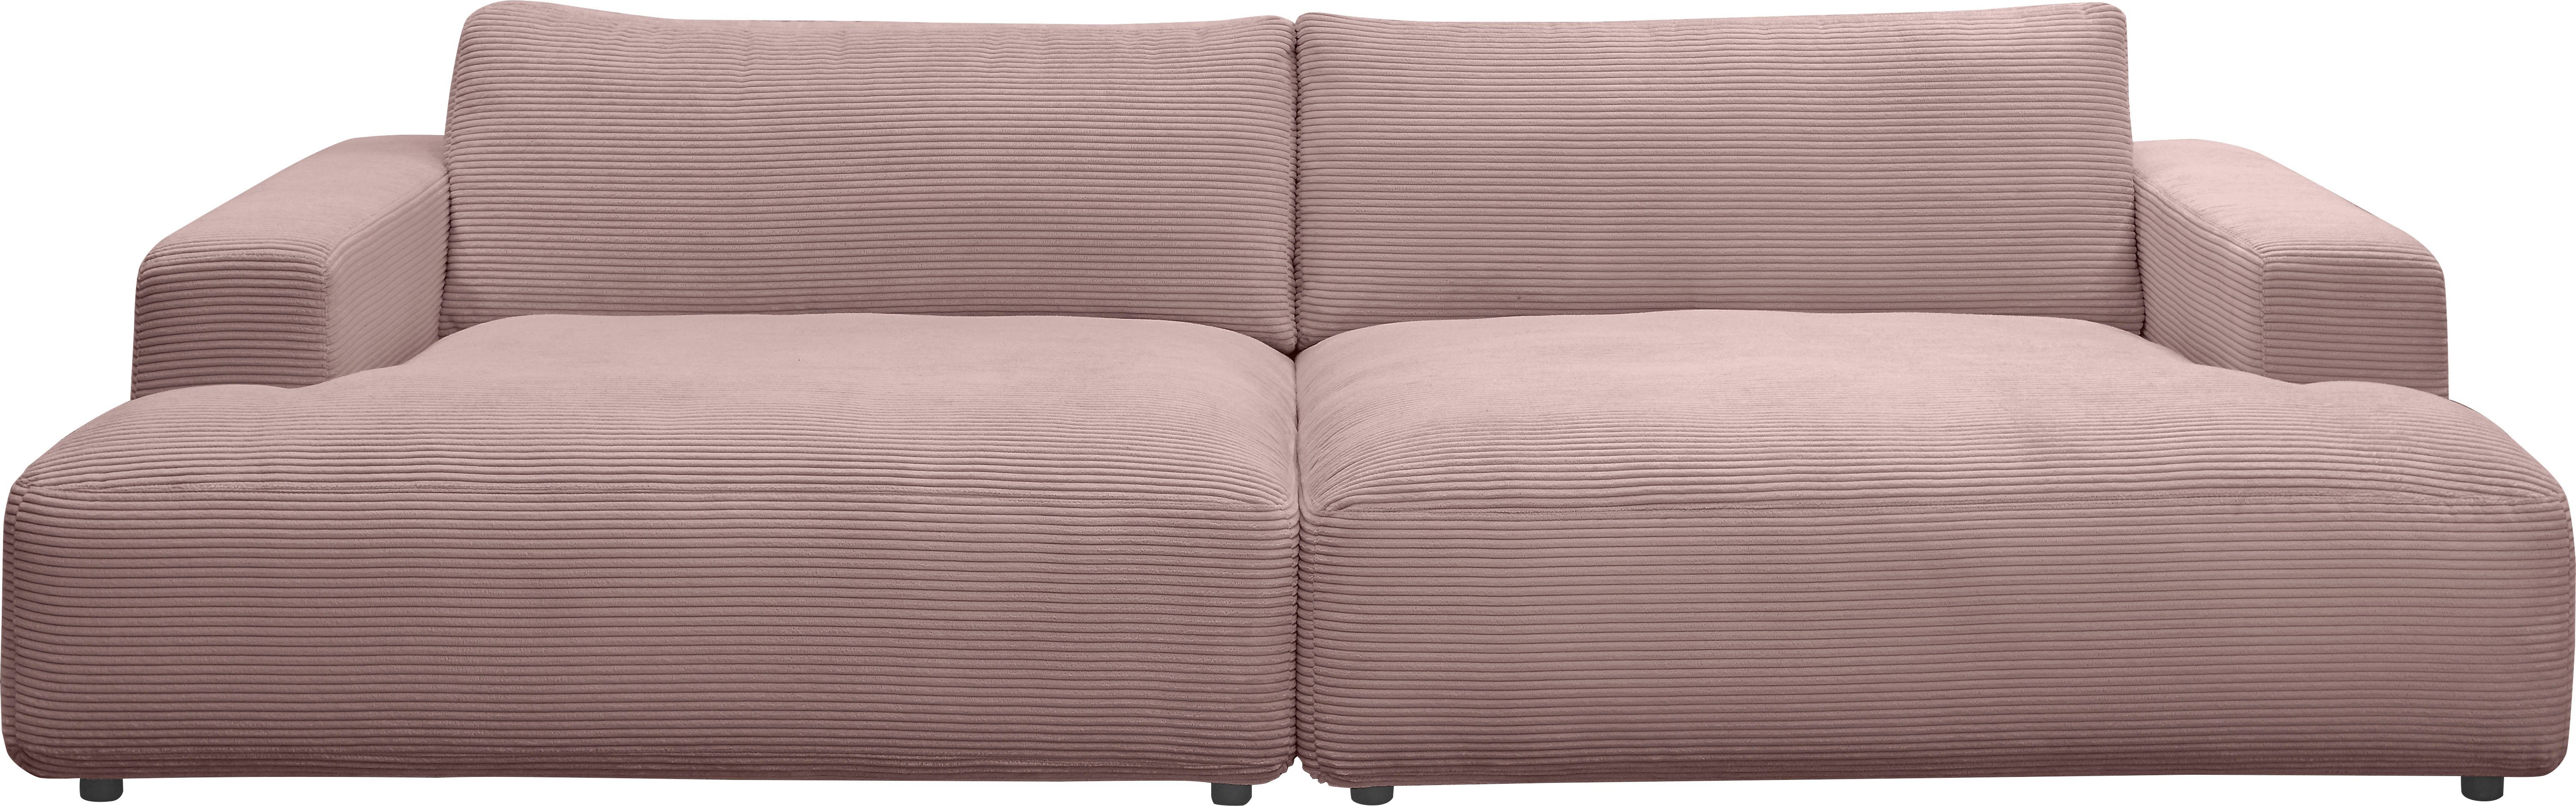 GALLERY M Breite Lucia, by Loungesofa branded 292 cm rosa Musterring Cord-Bezug